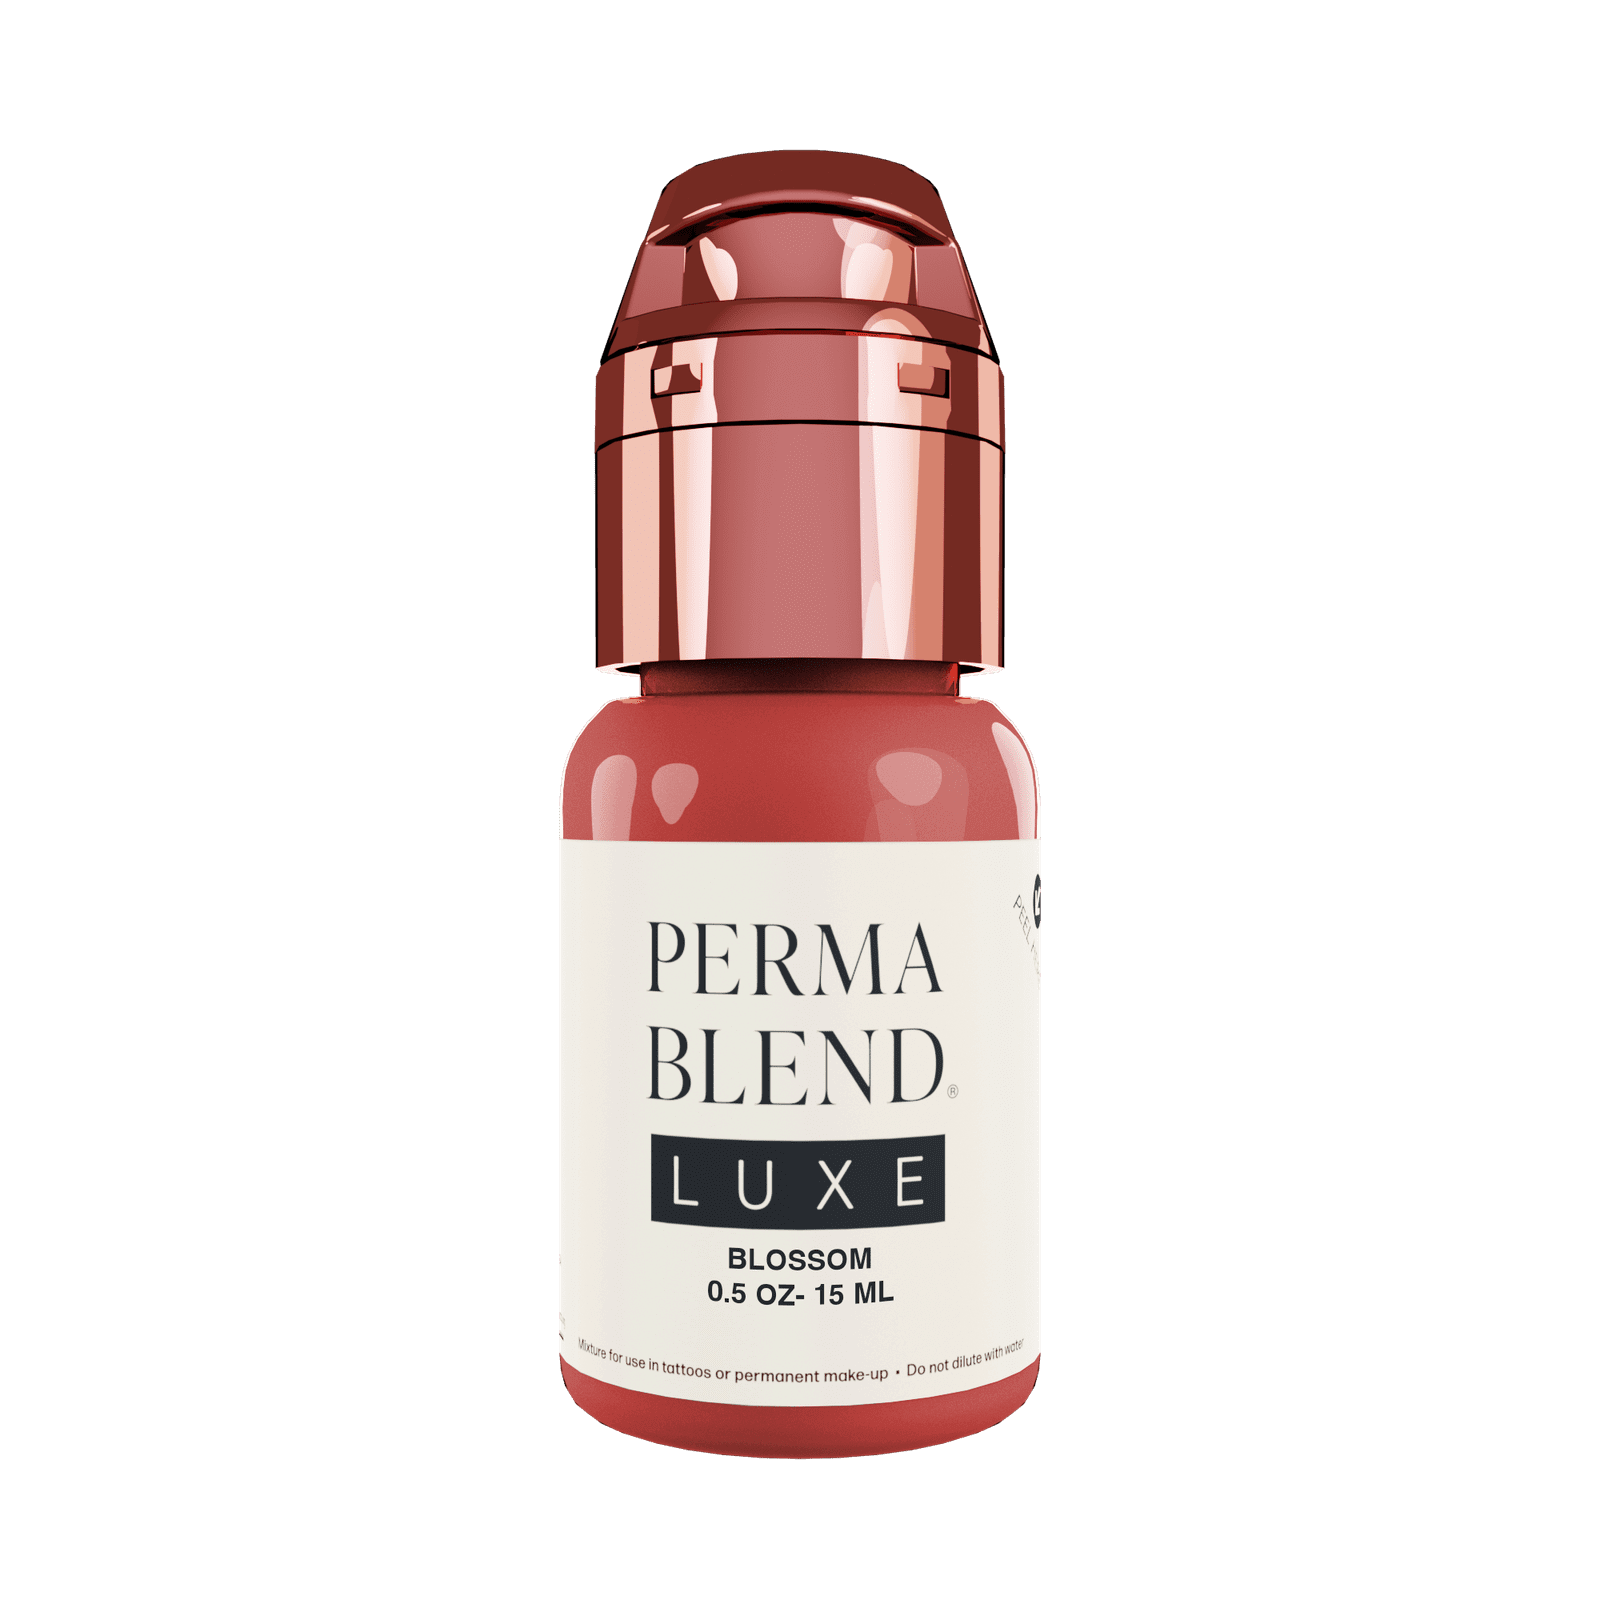 Perma Blend Luxe Blossom